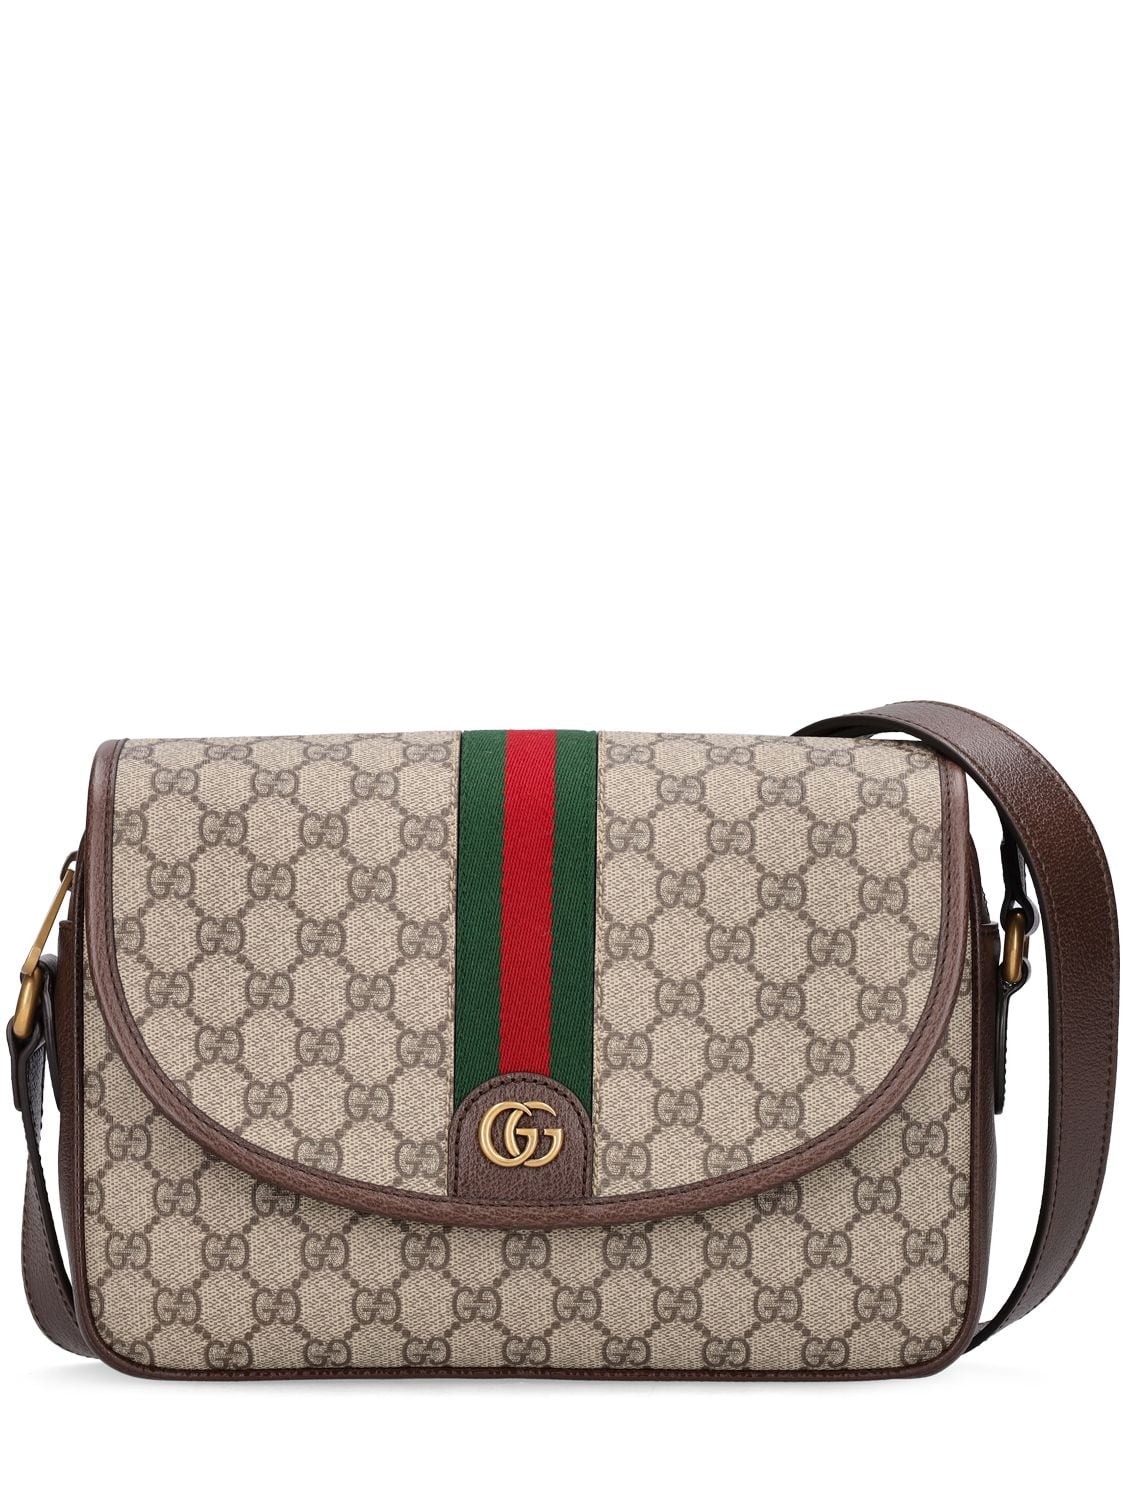 Gucci Ophidia Gg Printed Messenger Bag In Neutrals